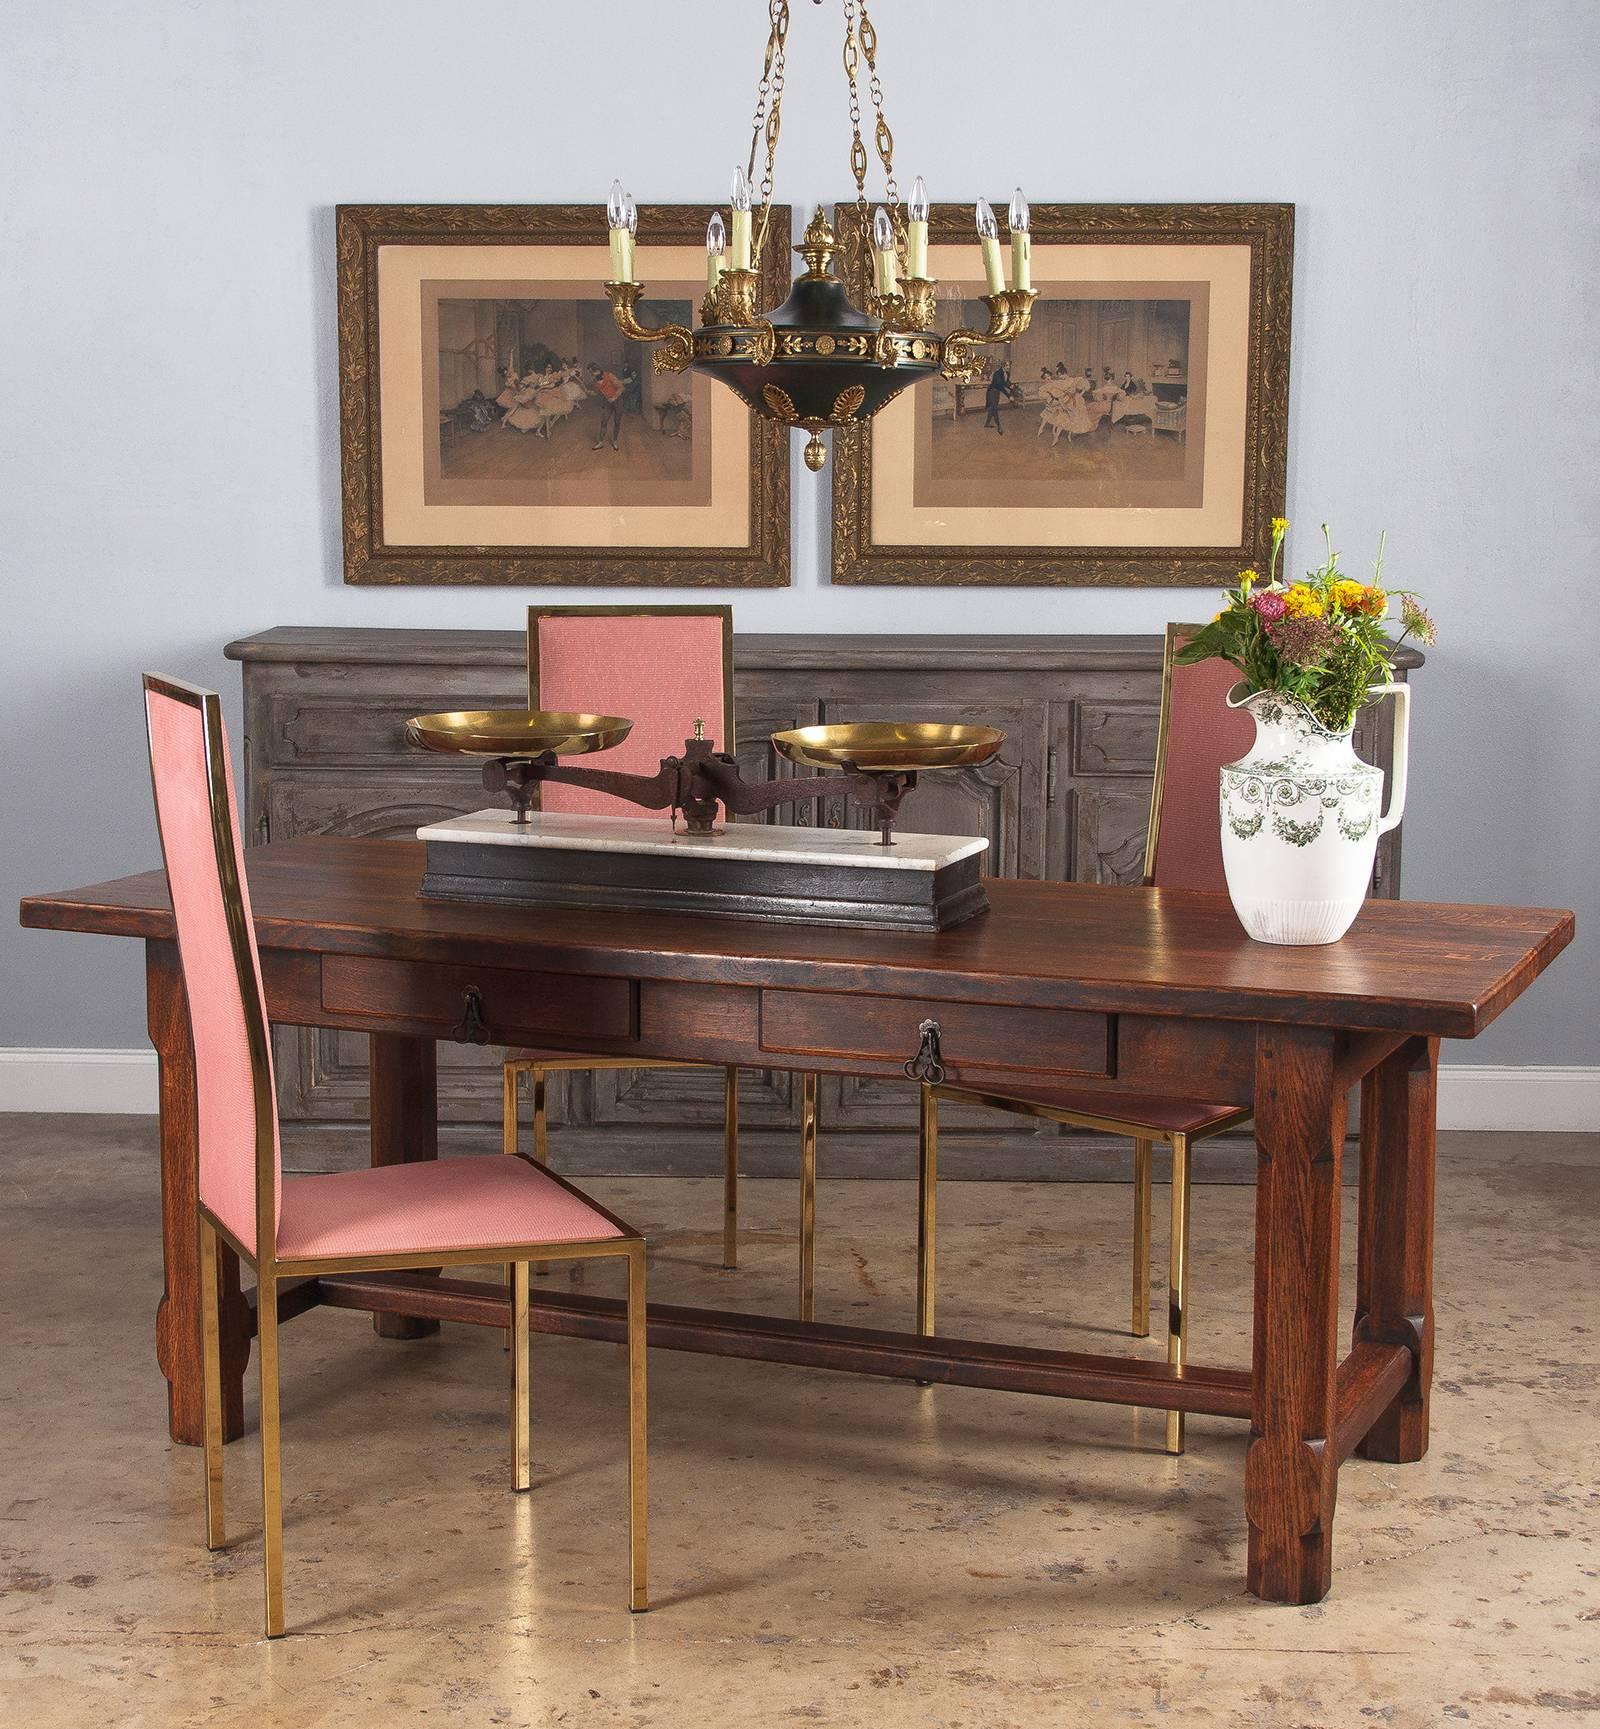 A substantial oak French country farm table or desk, circa 1900s. Dark stained oak with rustic peg construction. The top is made from seven thick boards joined by splines. Four stout post legs have their corners notched and carved into long, angled